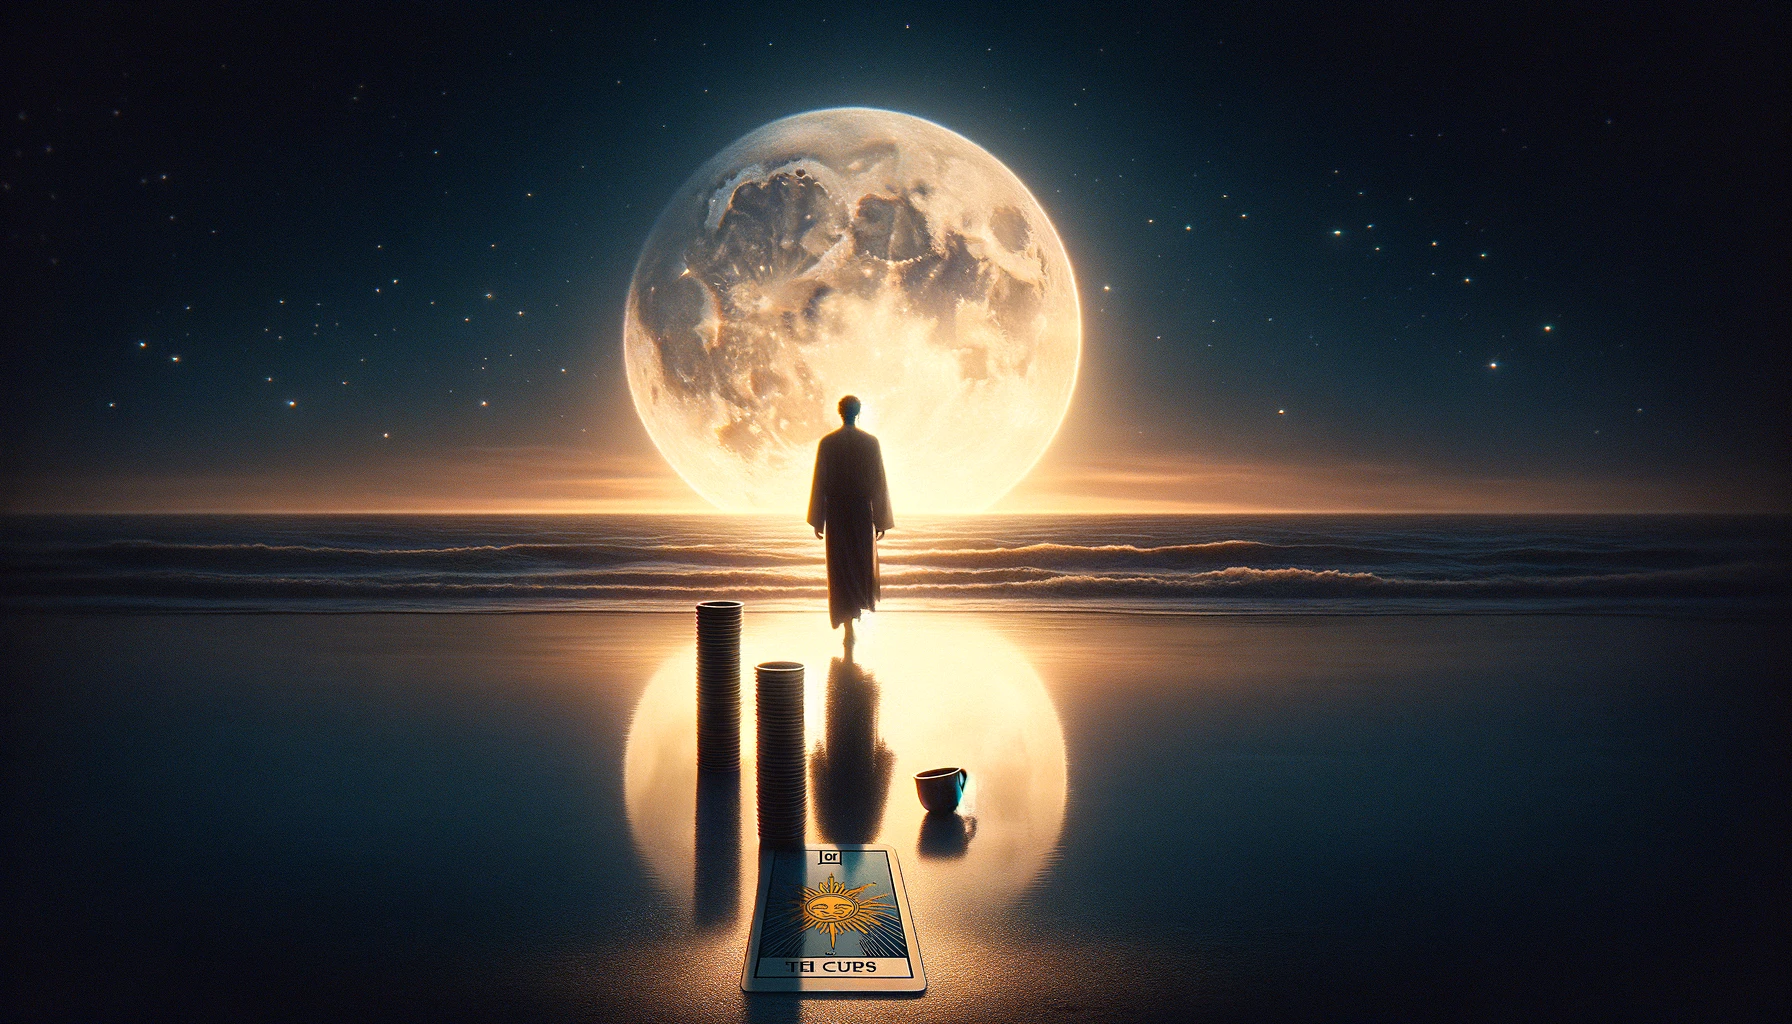 An image showcasing the Eight of Cups tarot card a solitary figure walking away from a moonlit shore leaving behind a stack of cups. The scene captu